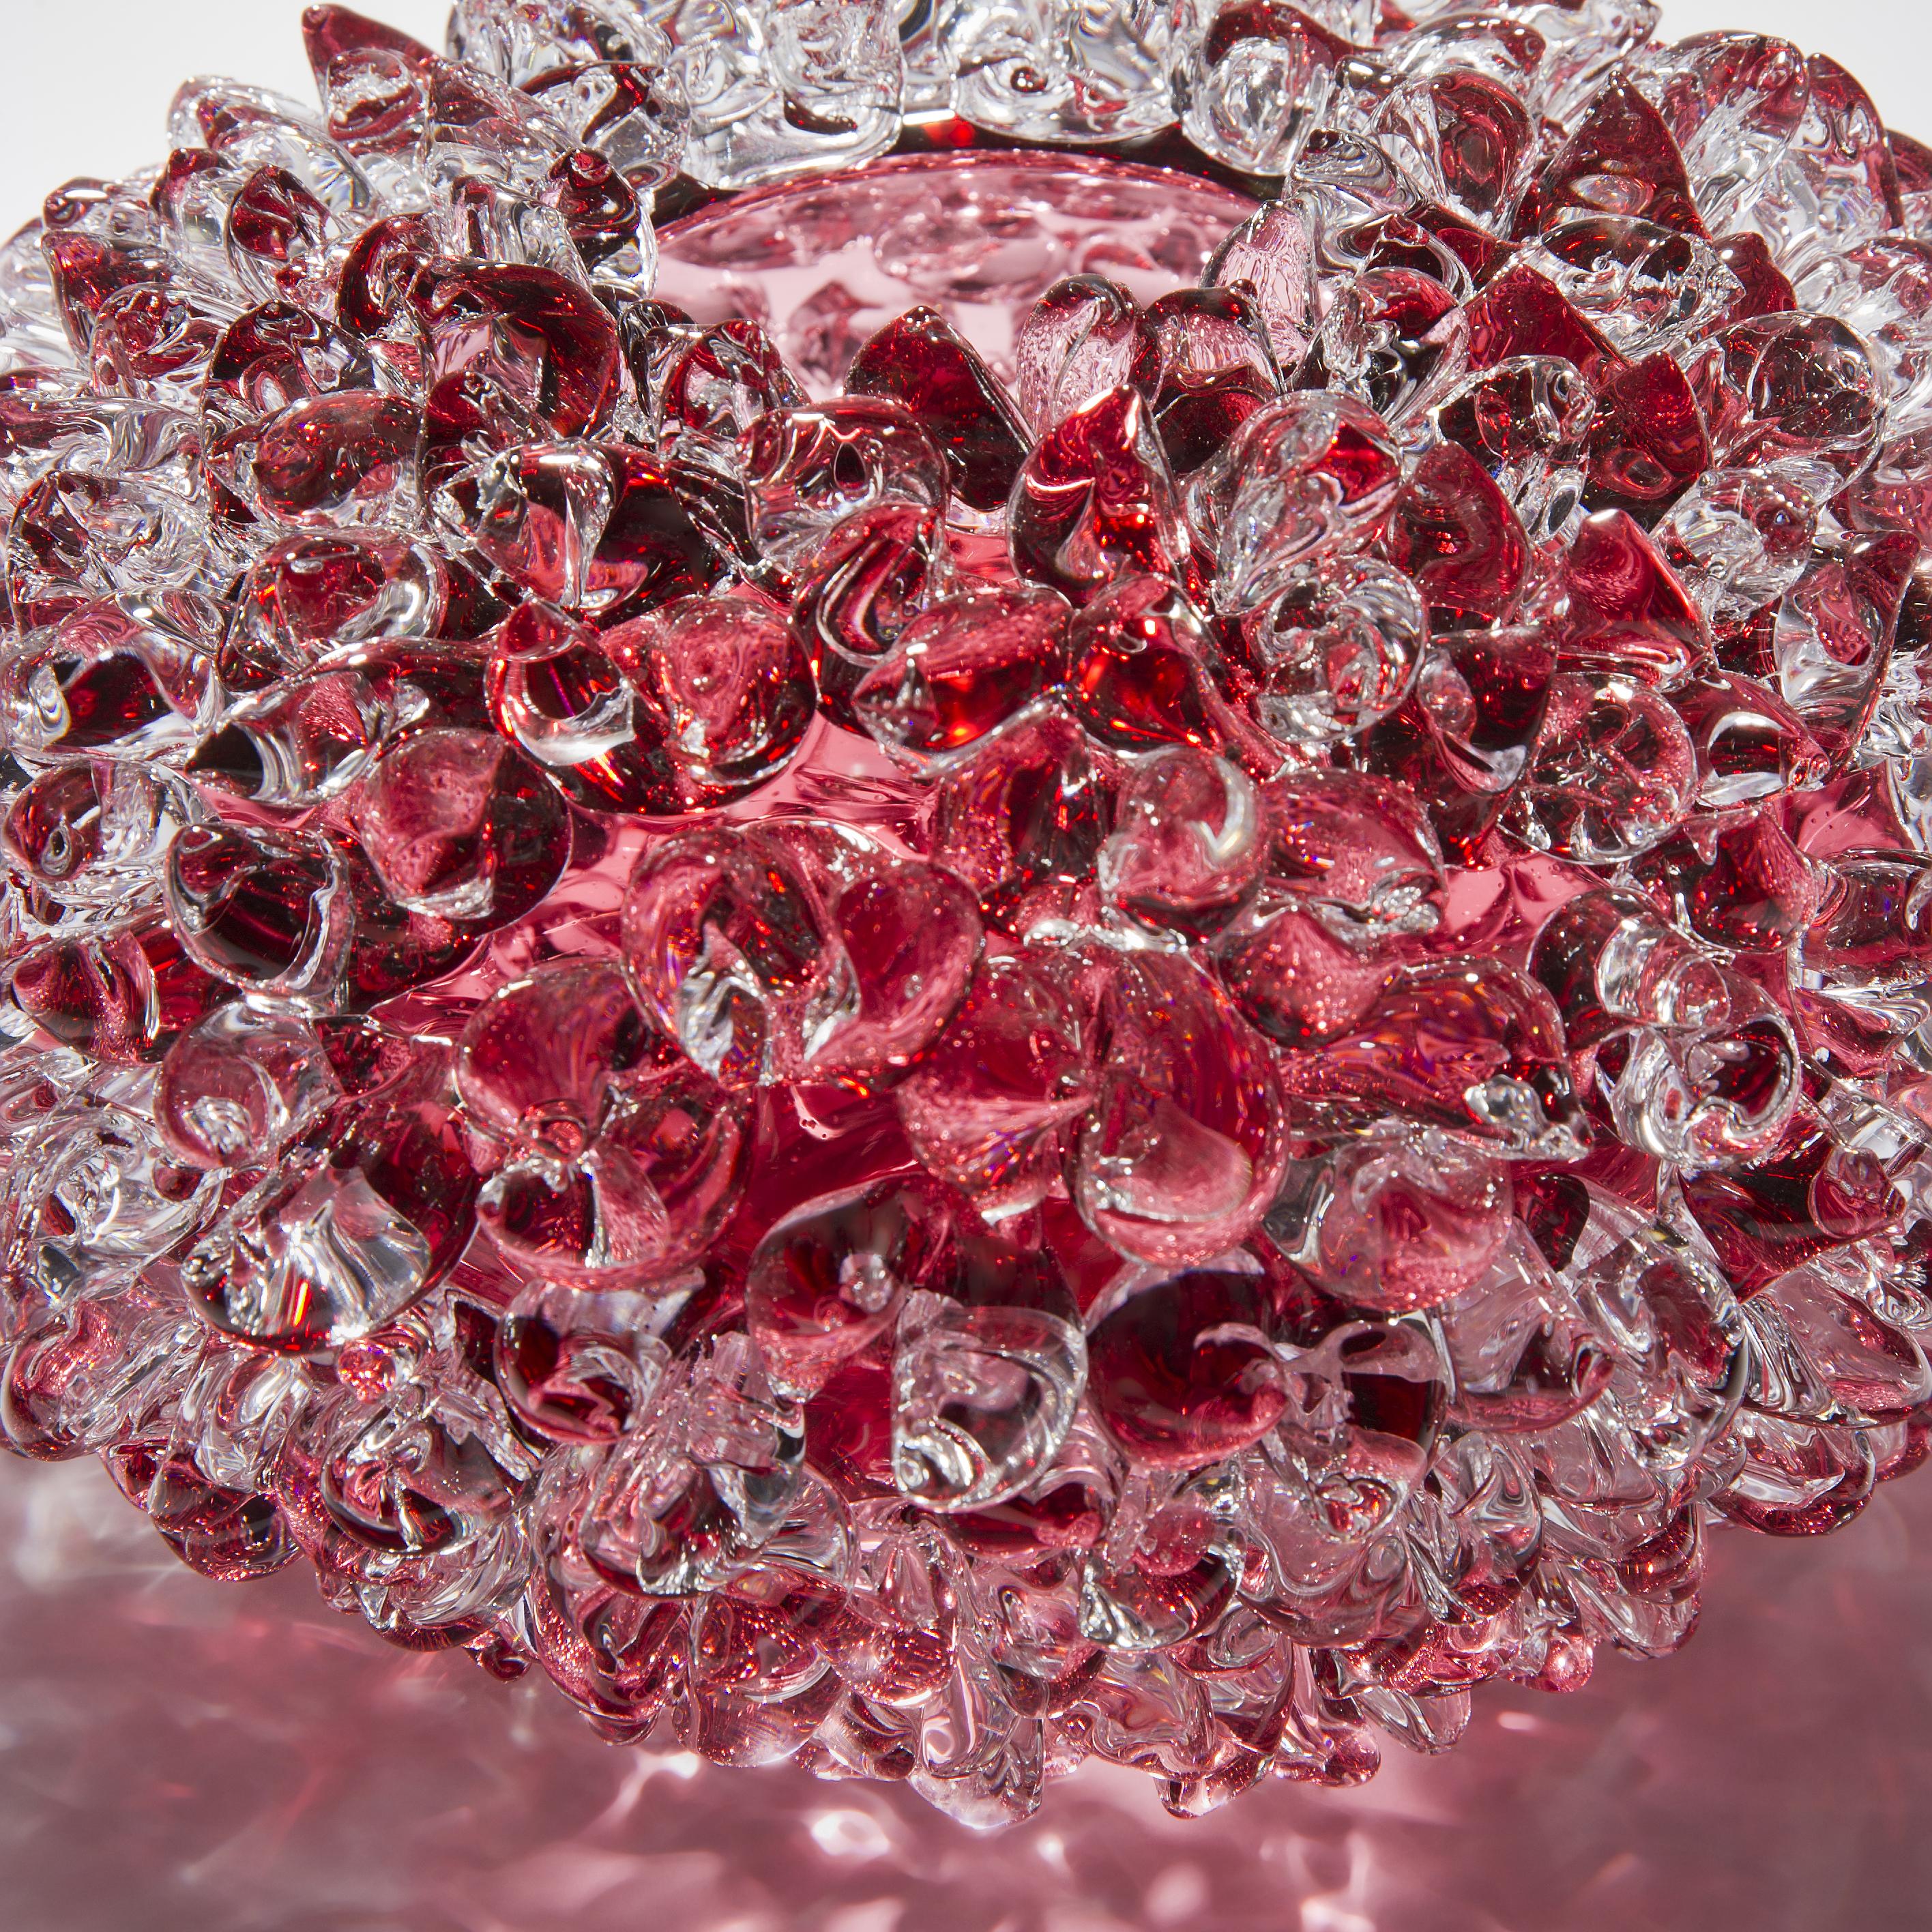 Hand-Crafted Ostreum in Heliotrope, a Unique Pink Glass Centerpiece by Katherine Huskie